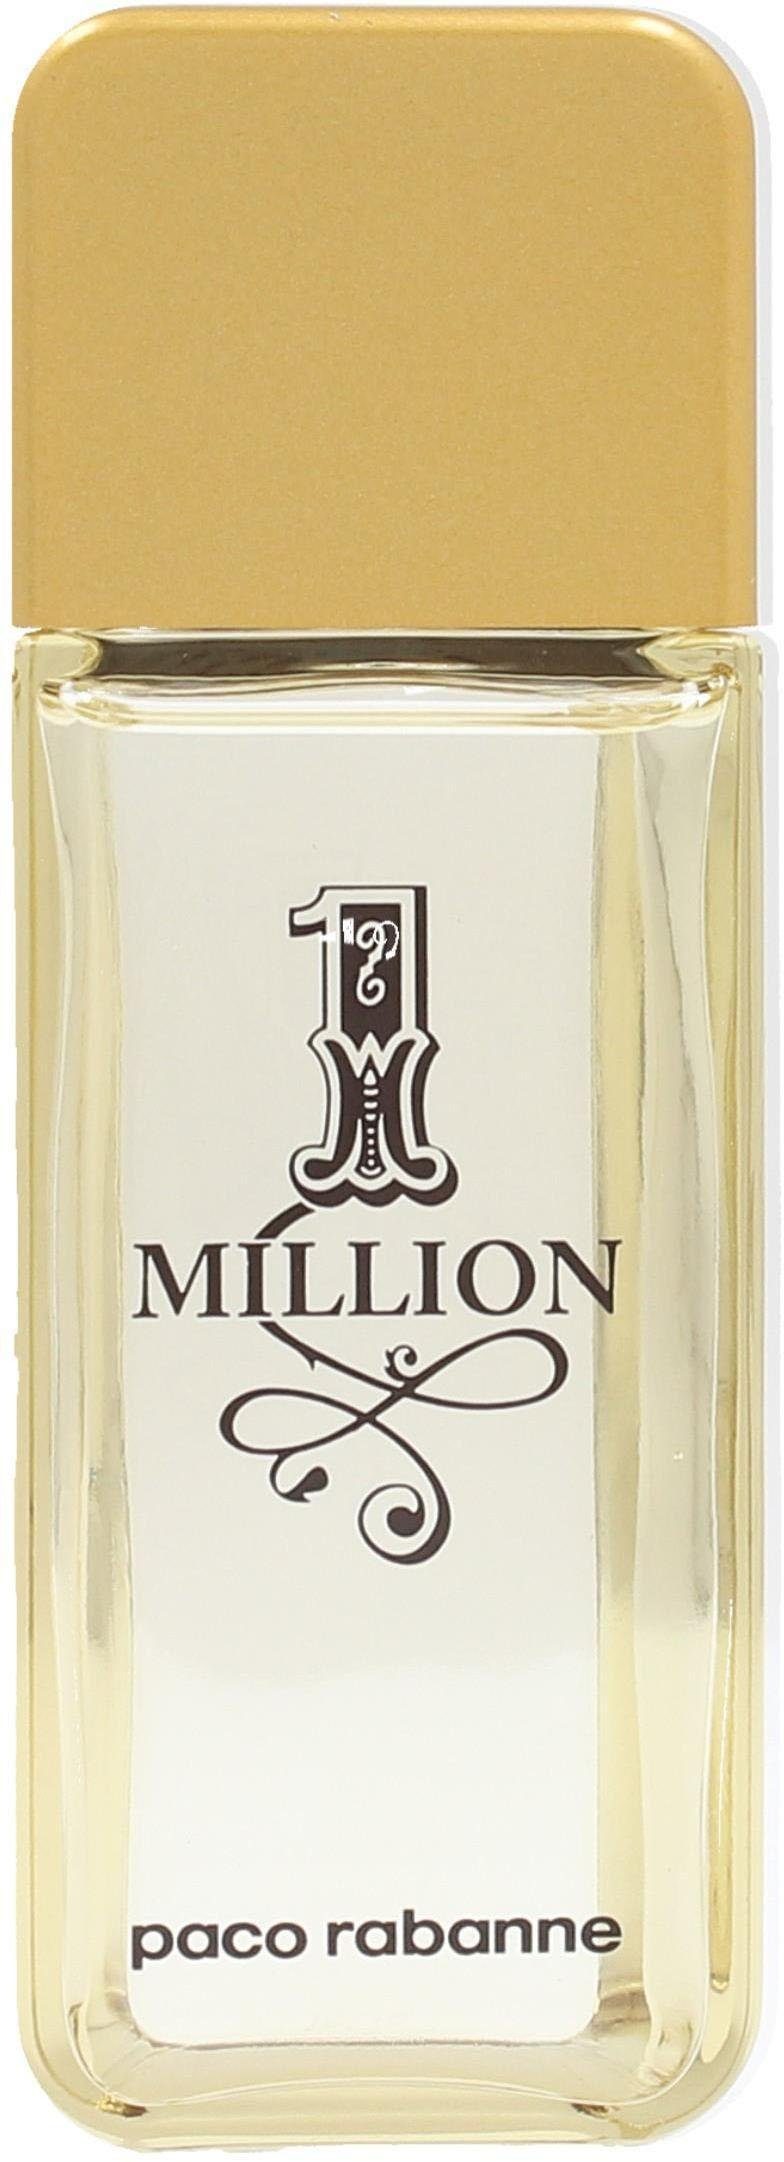 After-Shave rabanne Million paco 1